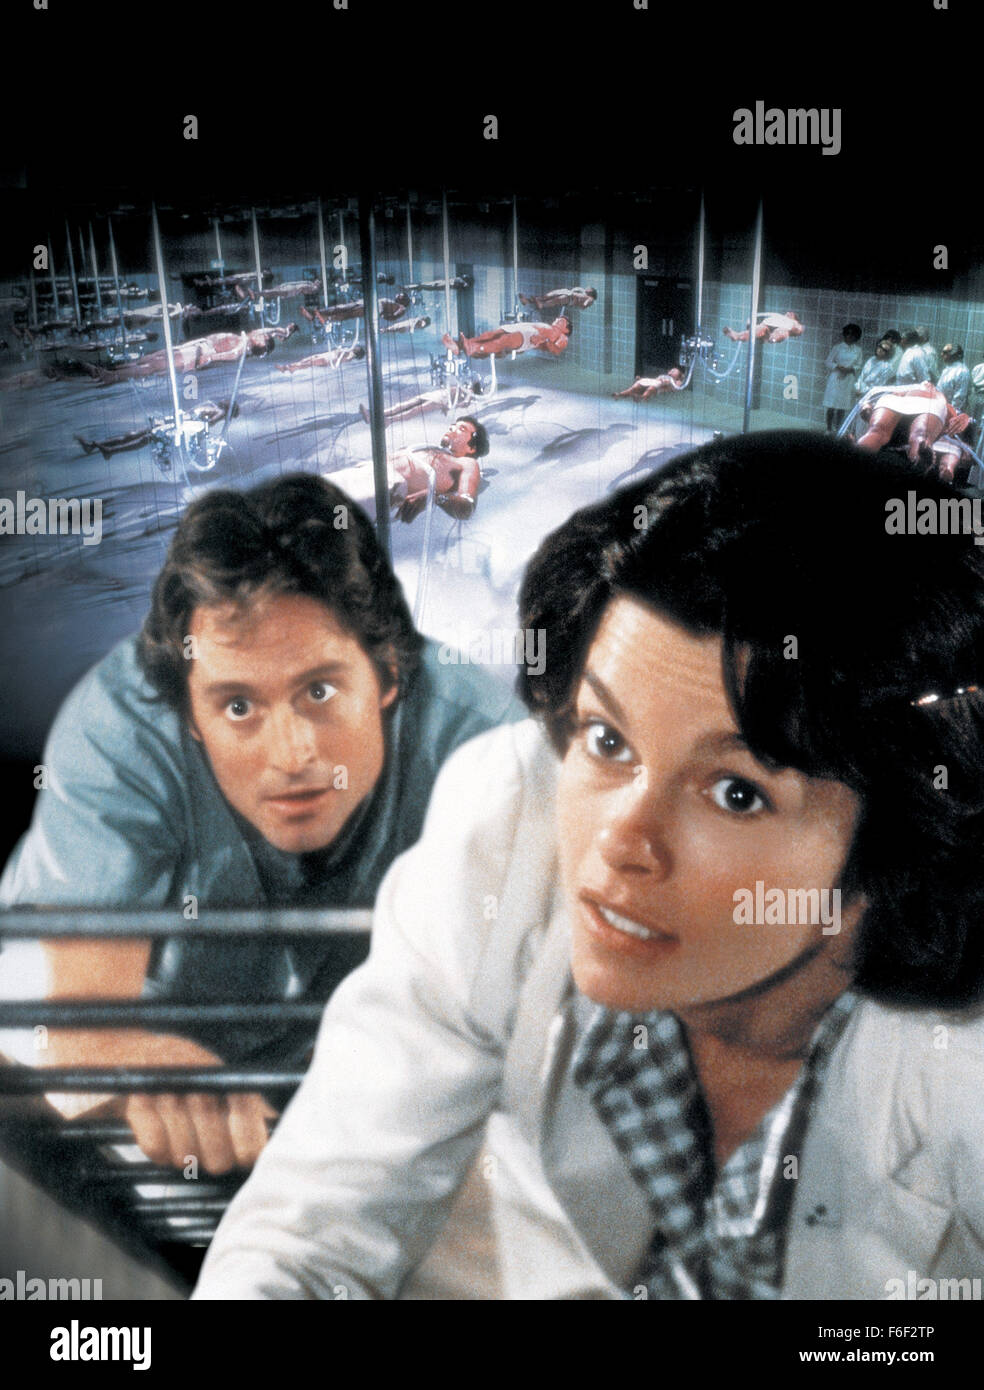 Jan 06, 1978; Los Angeles, CA, USA; Key poster art featuring MICHAEL DOUGLAS as Dr. Mark Bellows and GENEVIEVE BUJOLD as Dr Susan Wheeler in the mystery thriller film 'Coma' directed by Michael Crichton. Stock Photo